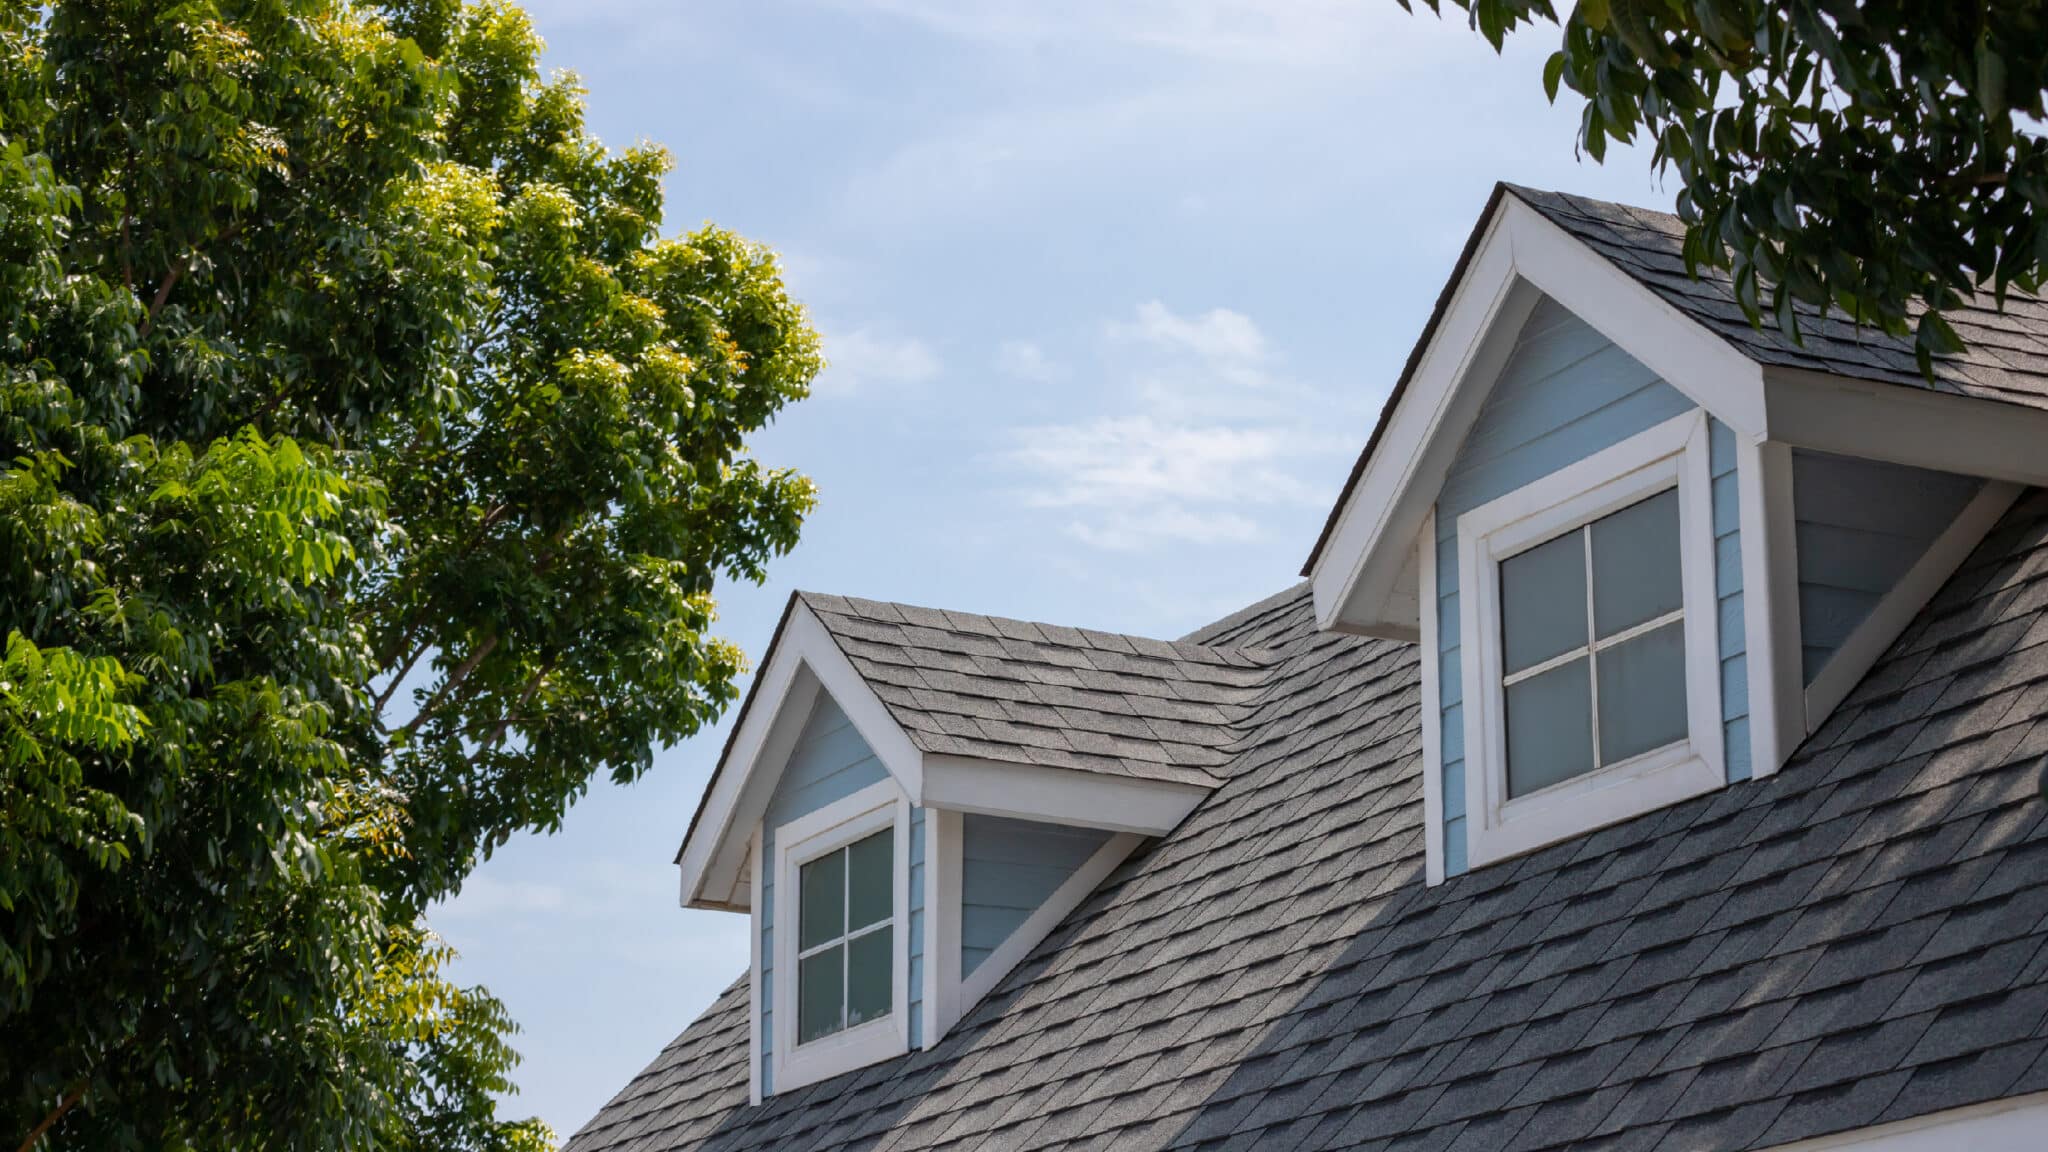 How To Choose the Best Materials and Warranties for Your New Roof